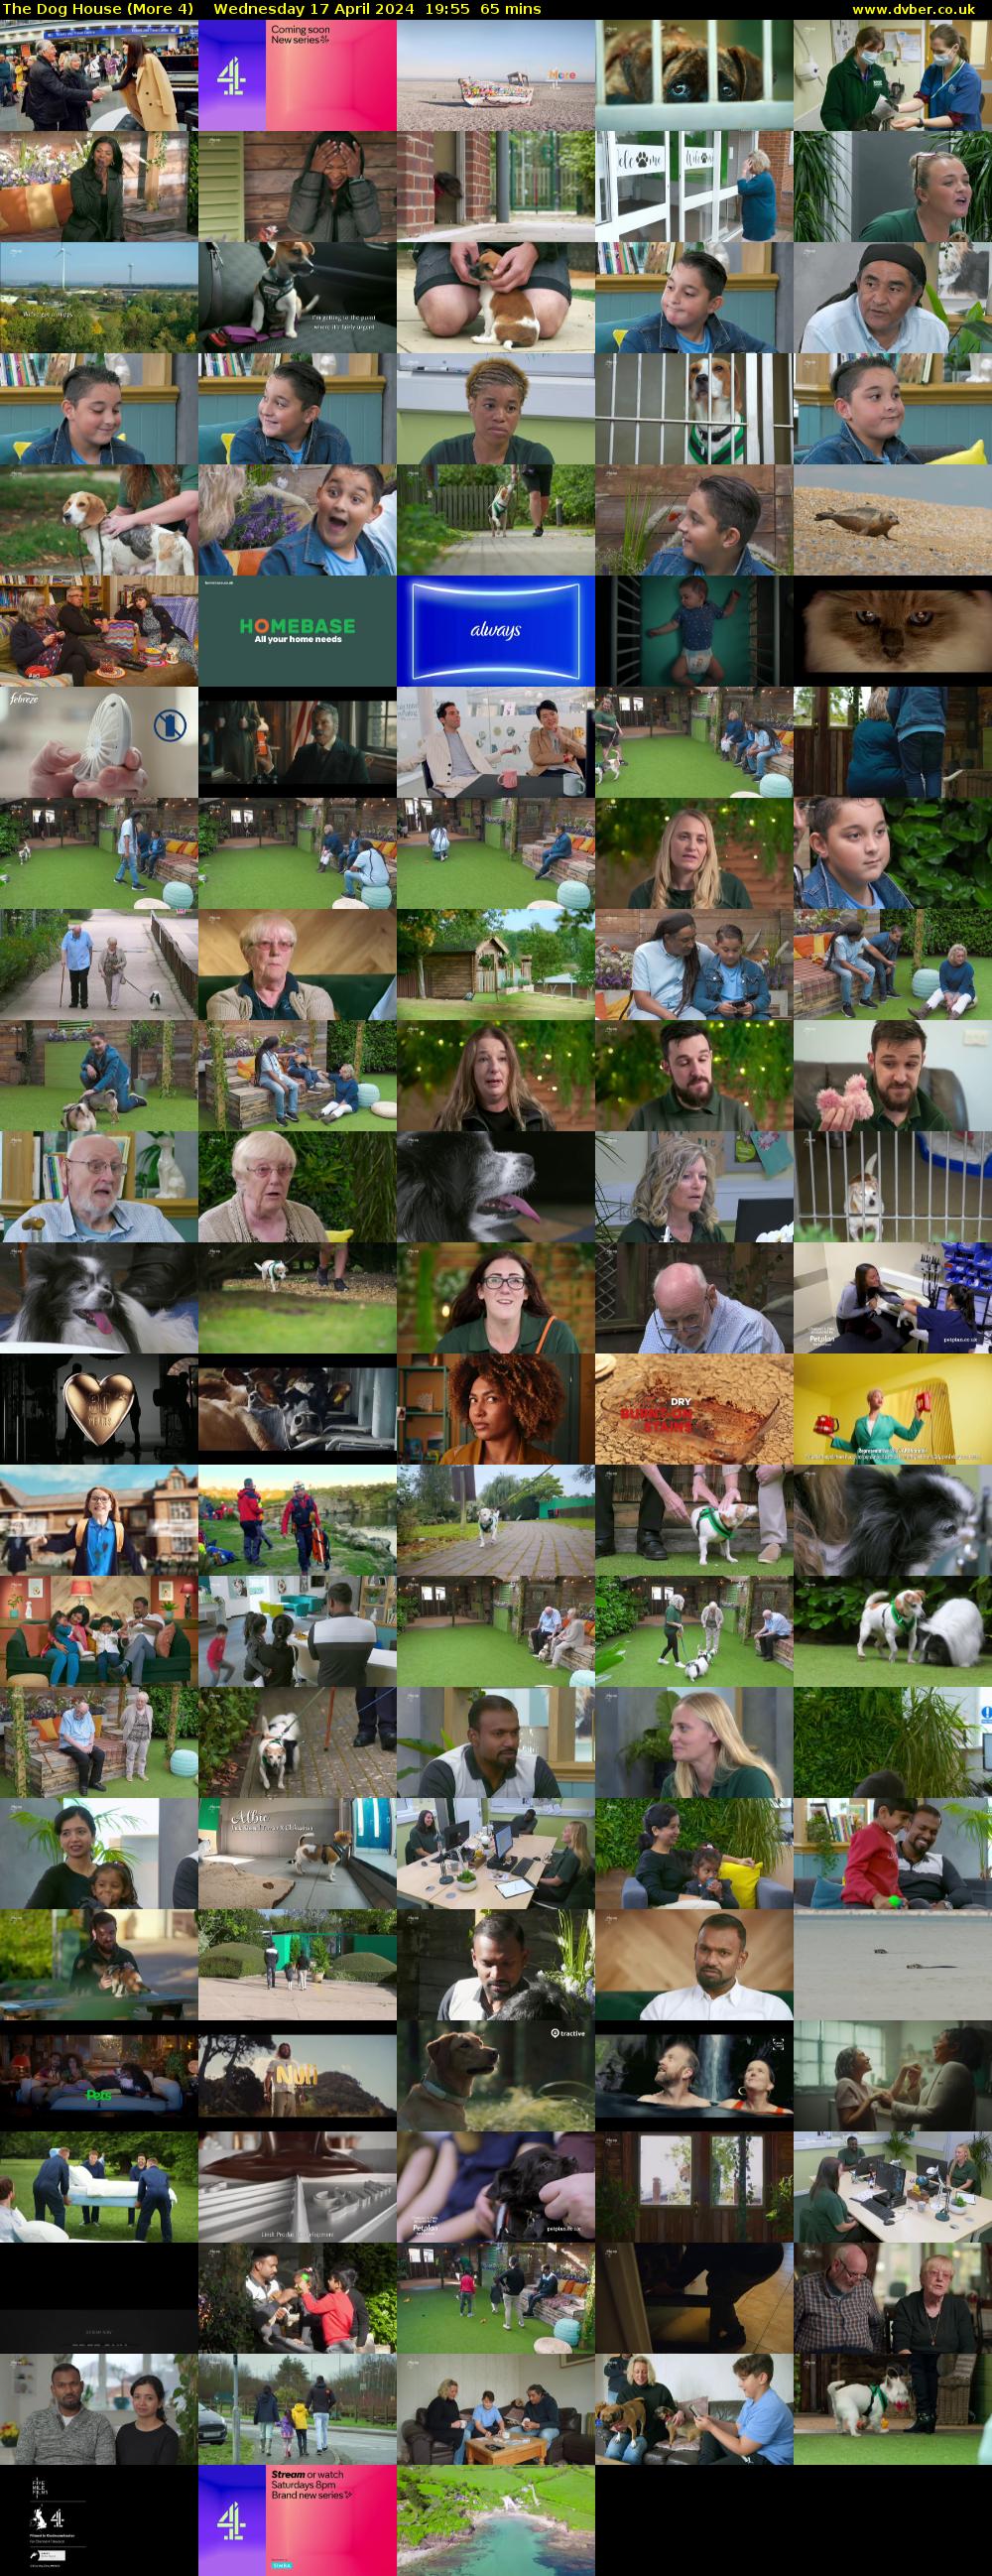 The Dog House (More 4) Wednesday 17 April 2024 19:55 - 21:00